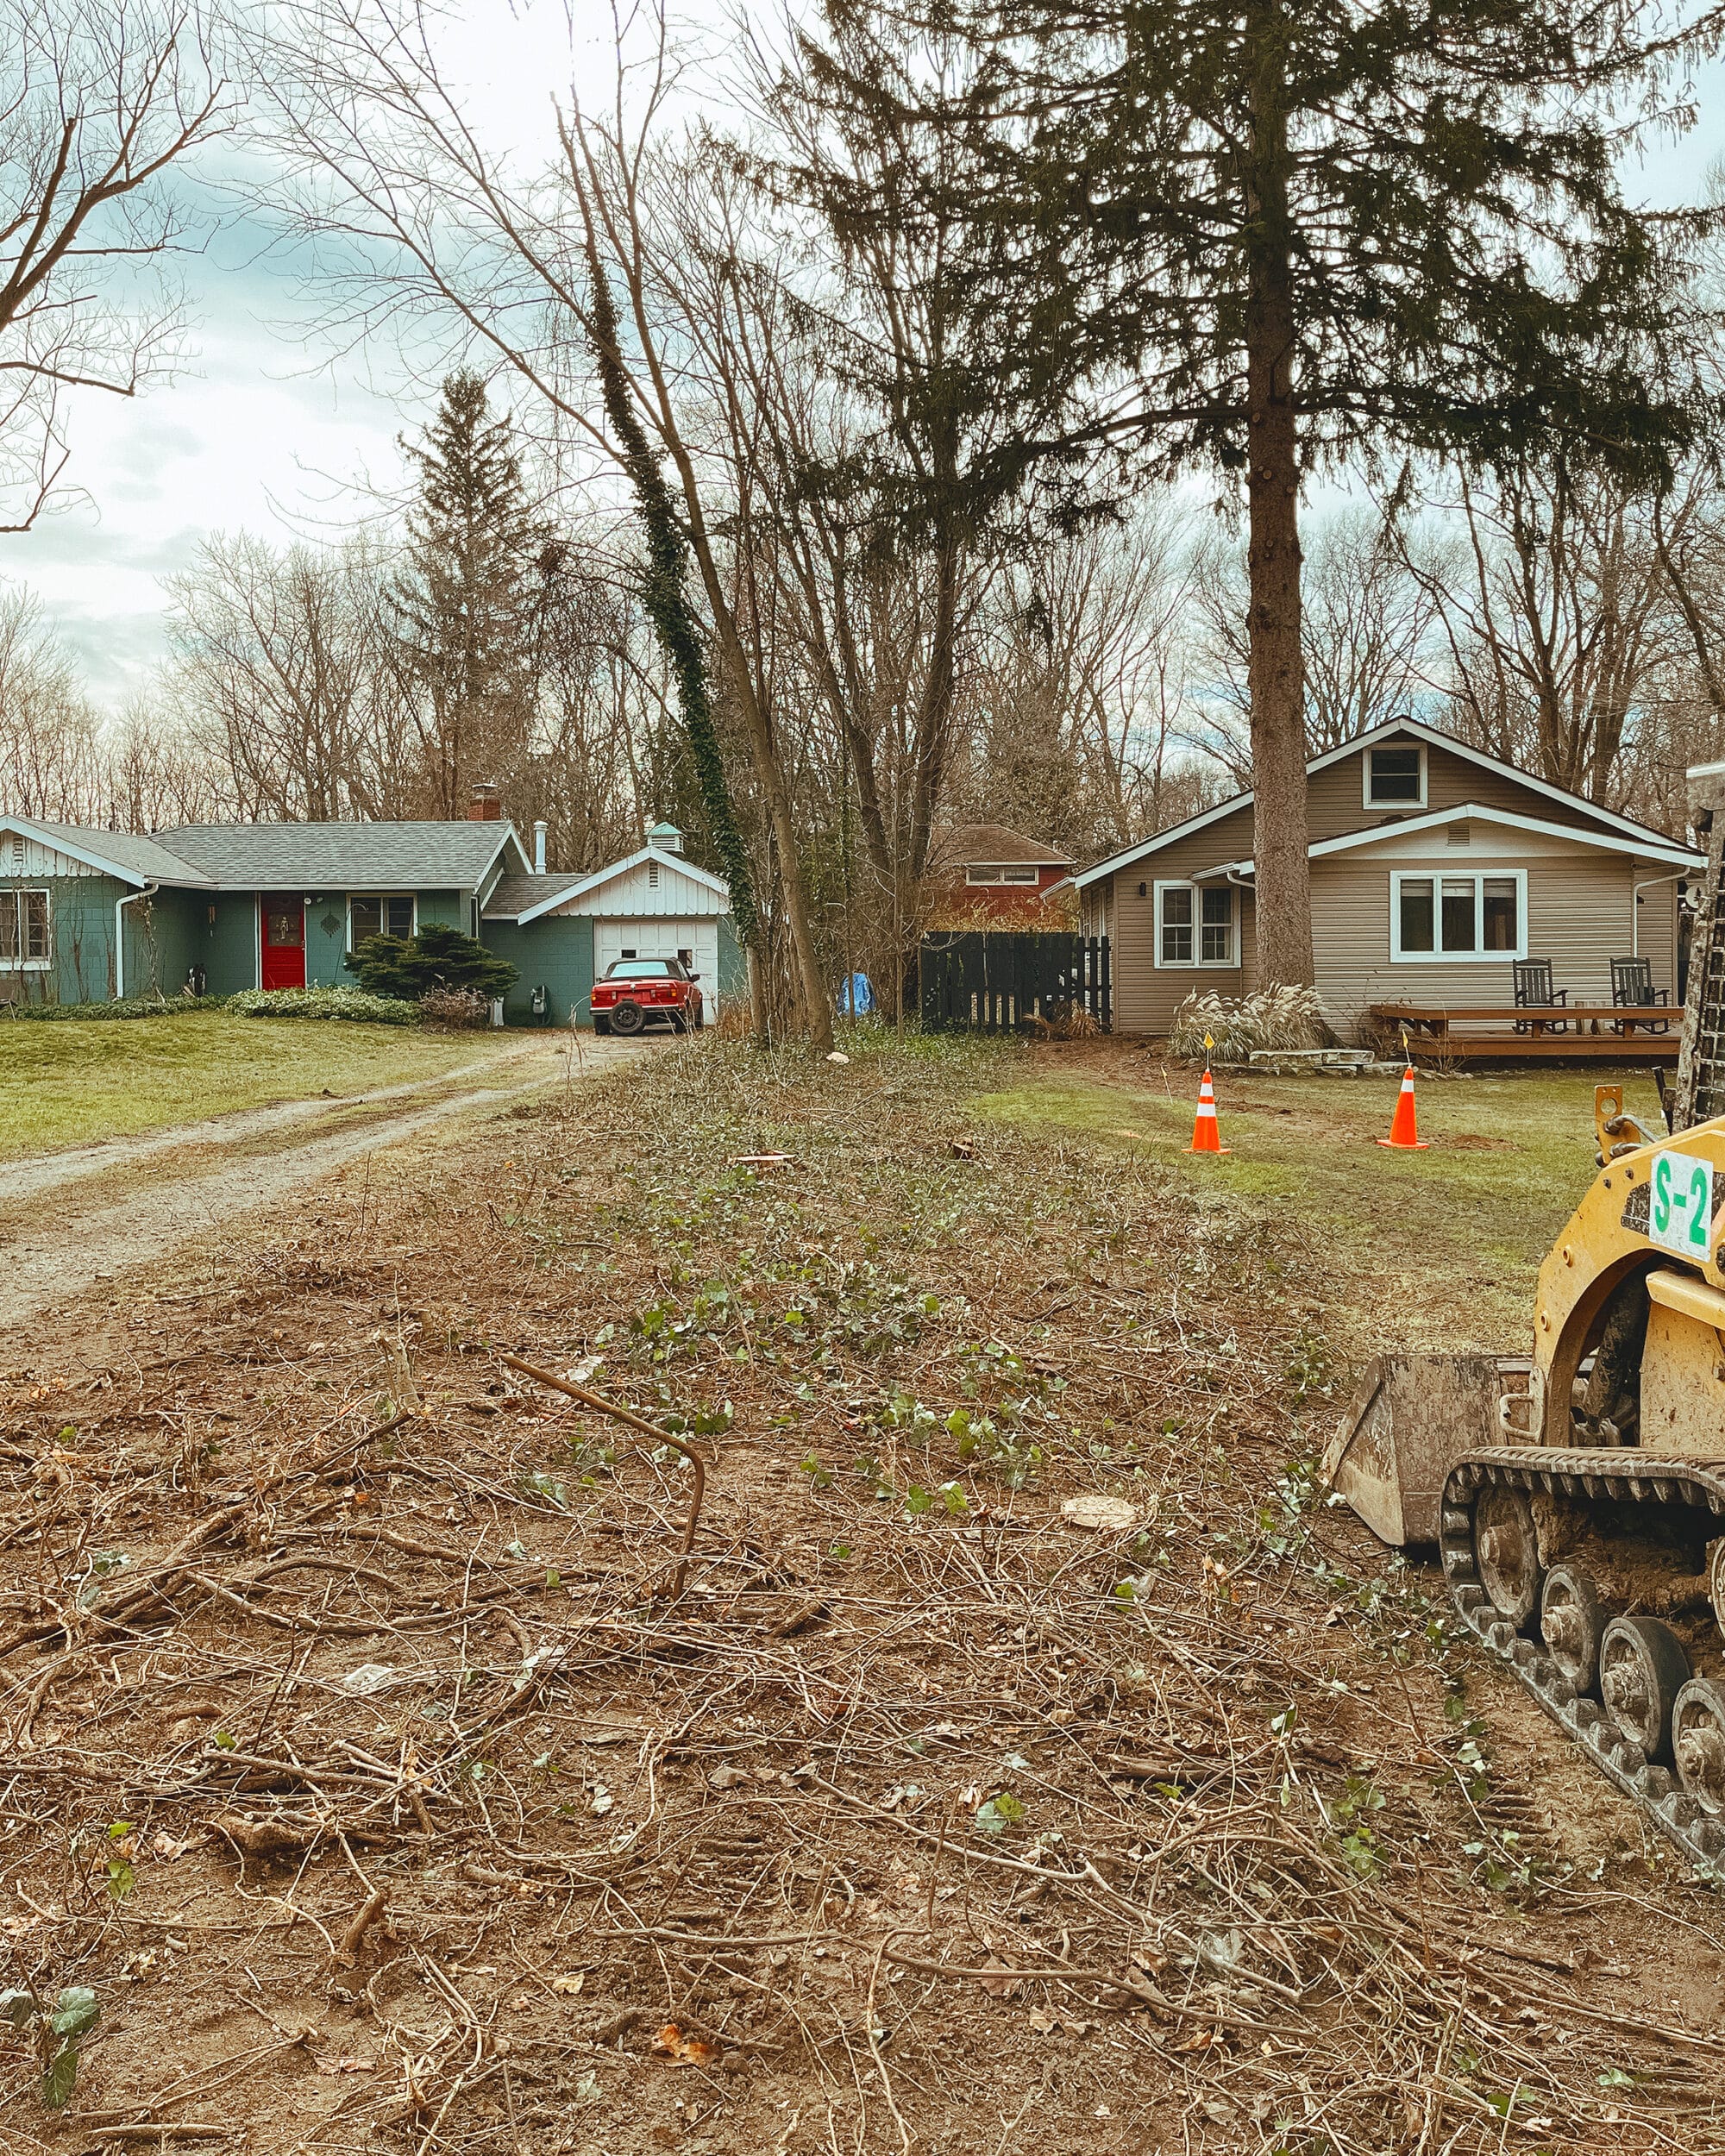 Landscaping work has begun! Clearing work for the berm | via Yellow Brick Home